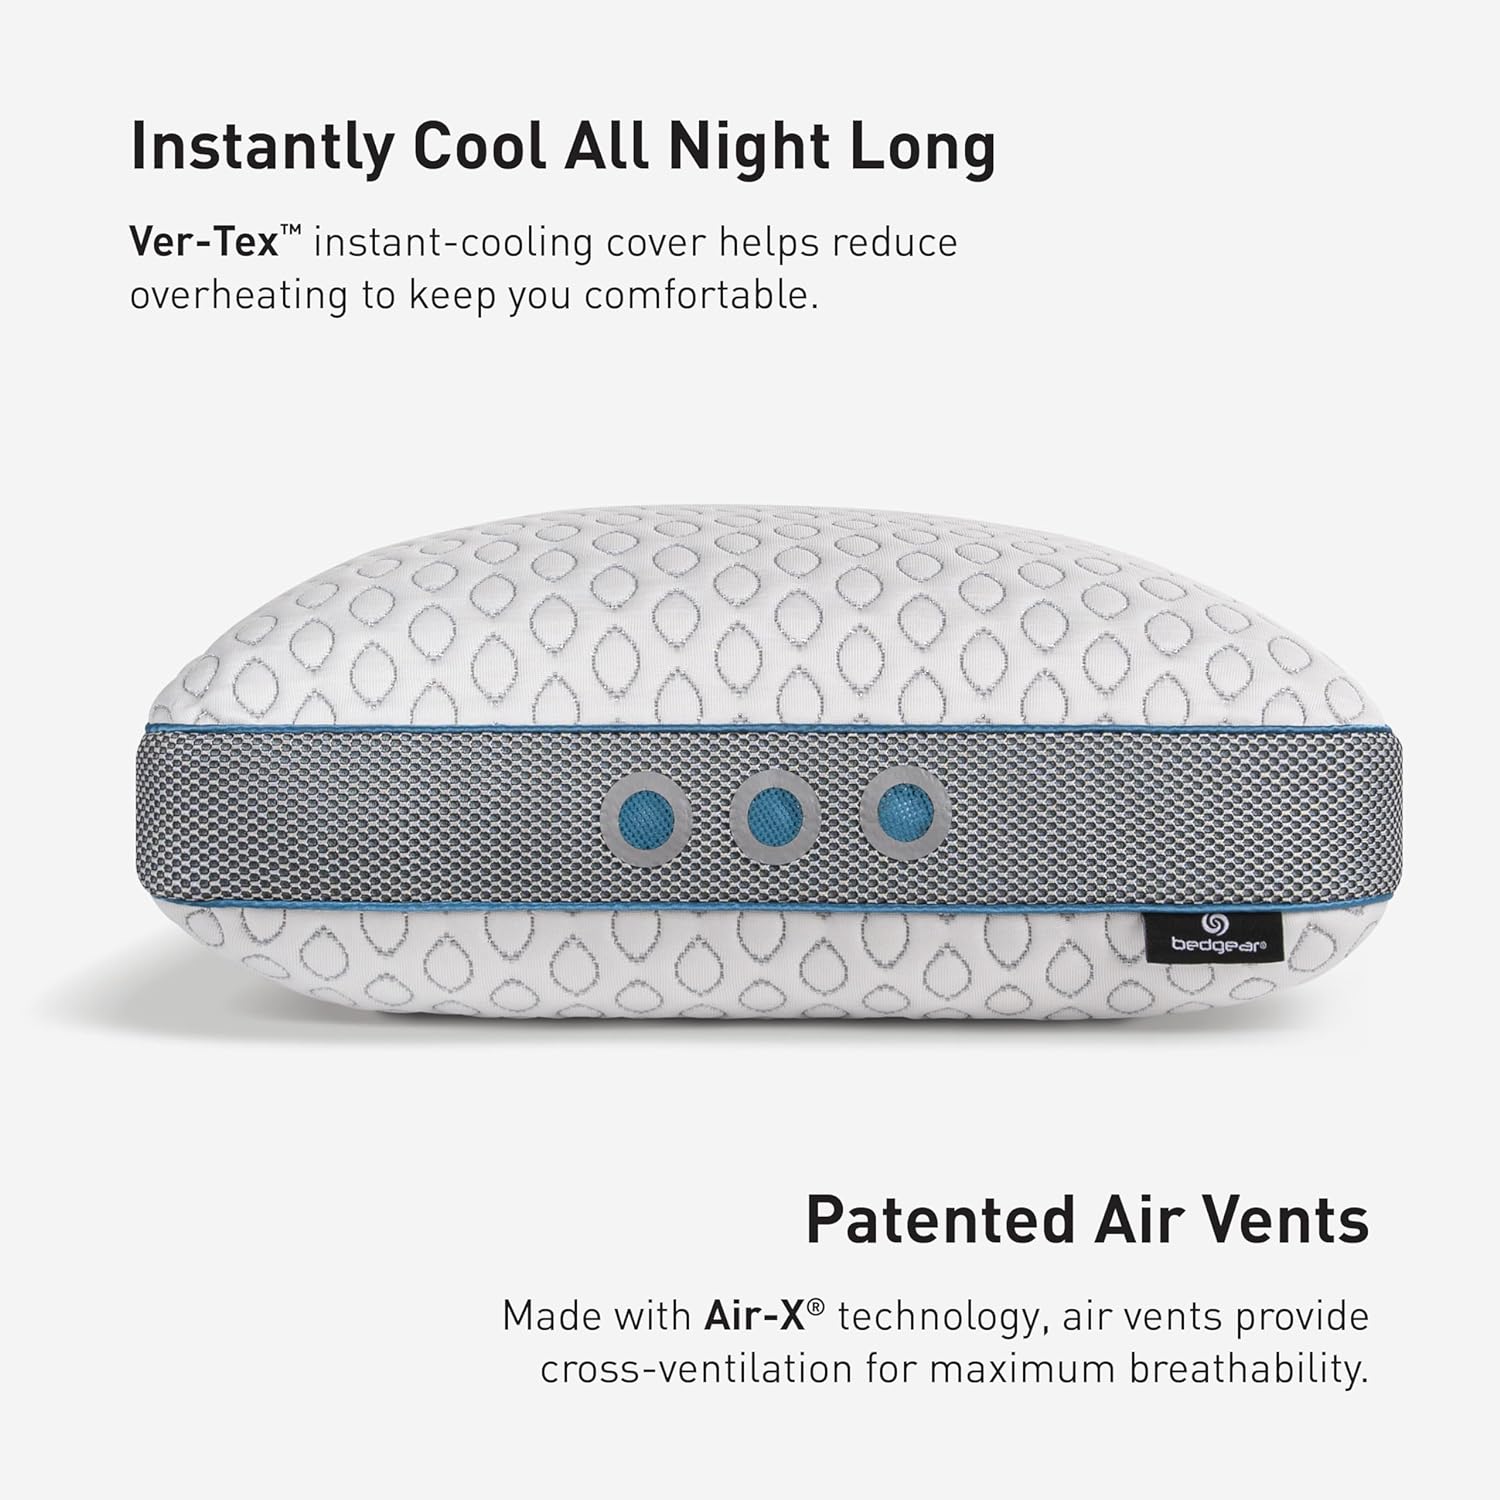 FROST PILLOW by Bedgear - A Dual Sided True Cooling Pillow!